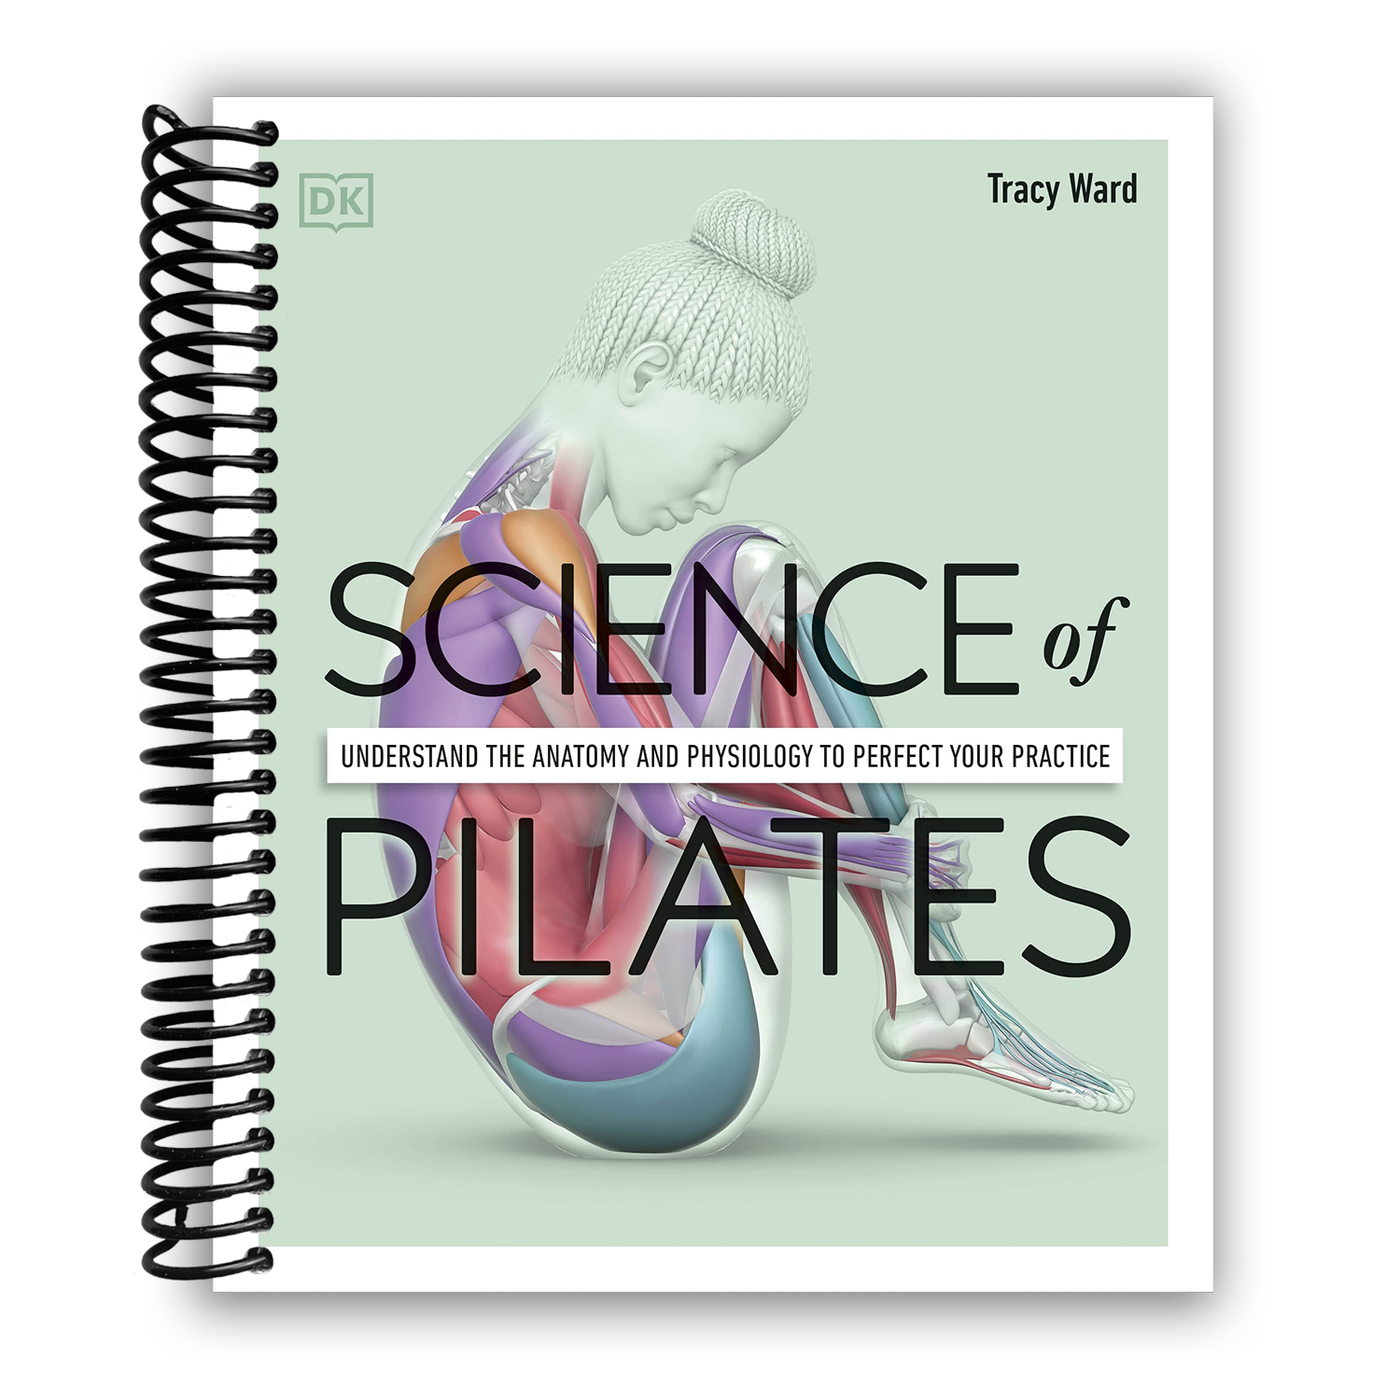 Science of Pilates: Understand the Anatomy and Physiology to Perfect Your Practice(Spiral-bound)